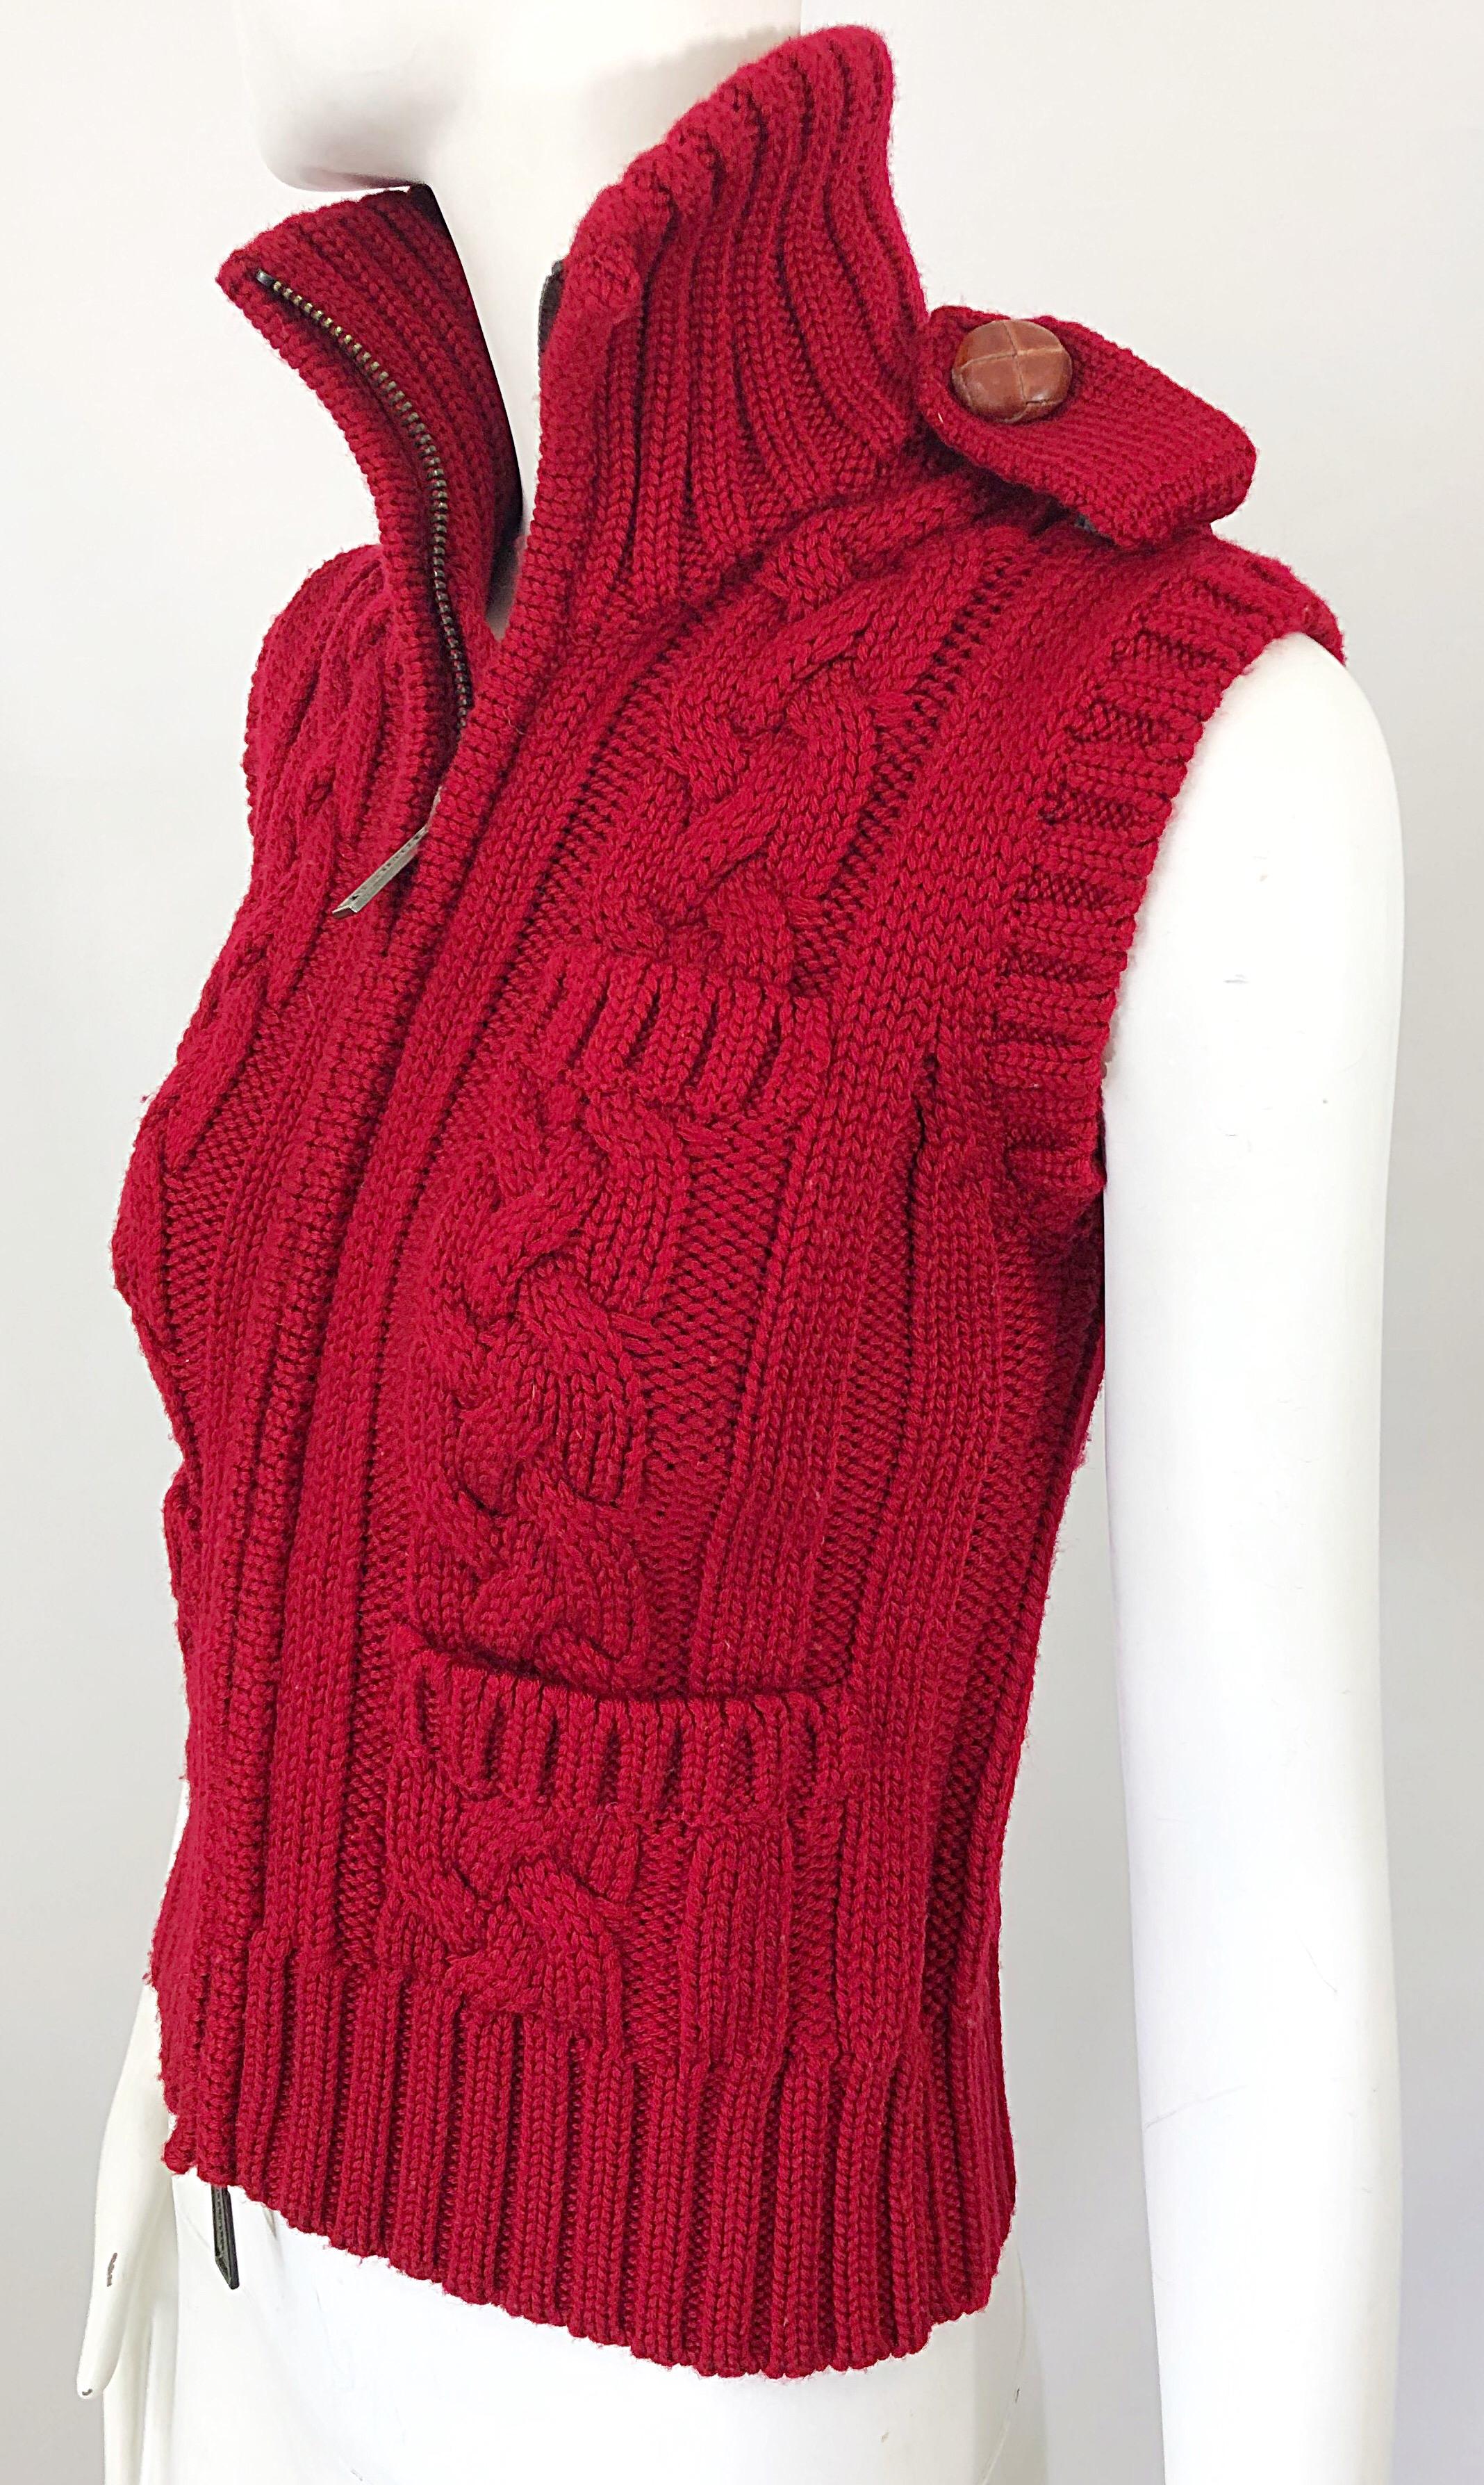 DSquared2 Early 2000s Lipstick Red Wool Sleeveless Cardigan Sweater Vest Top For Sale 5